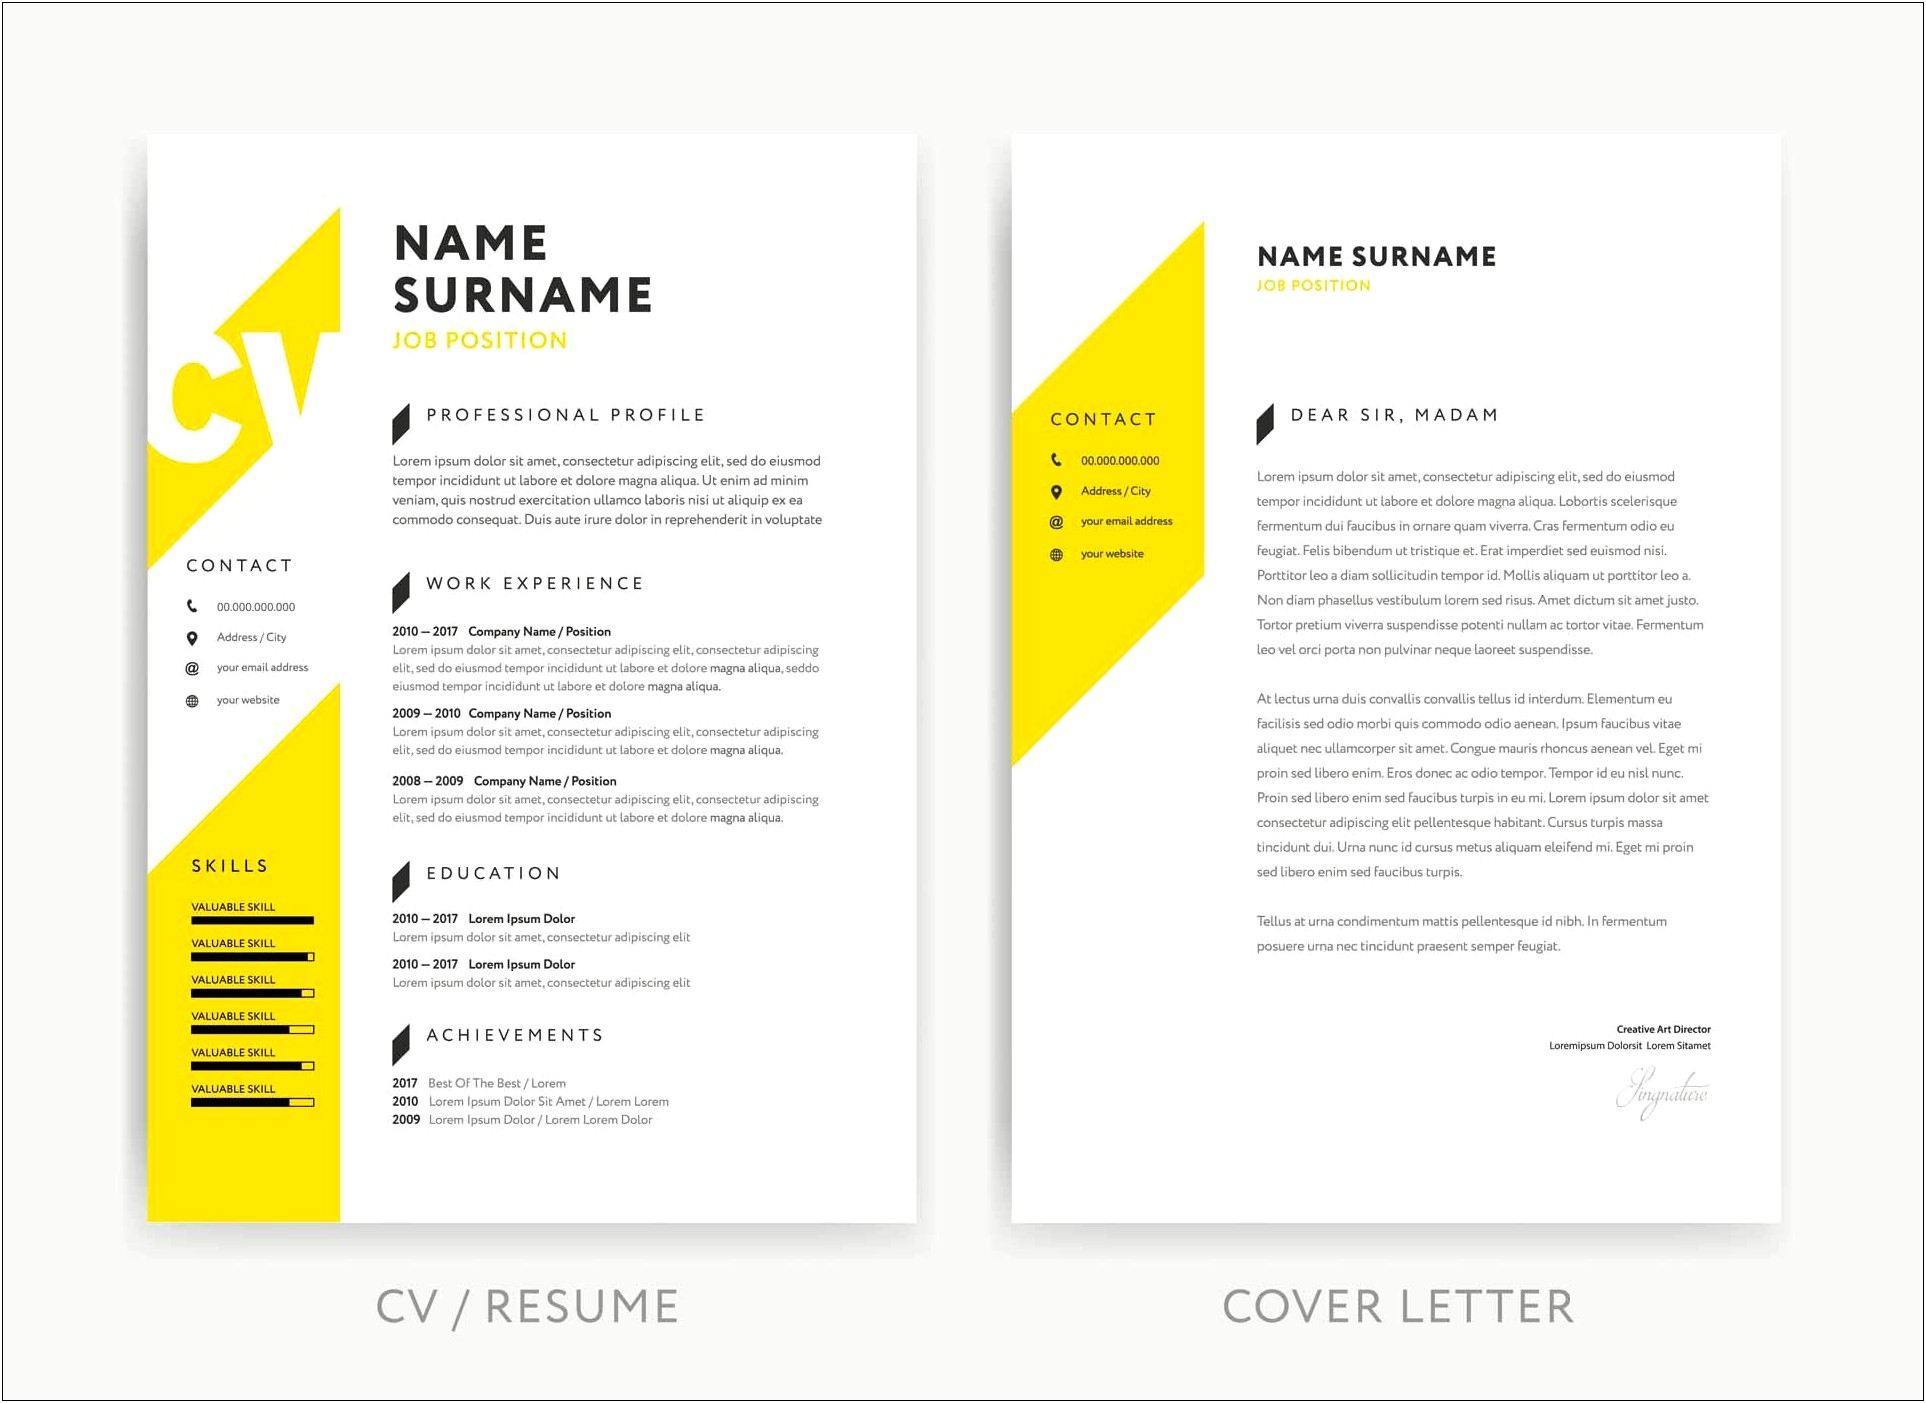 Should The Cover Letter Match The Resume